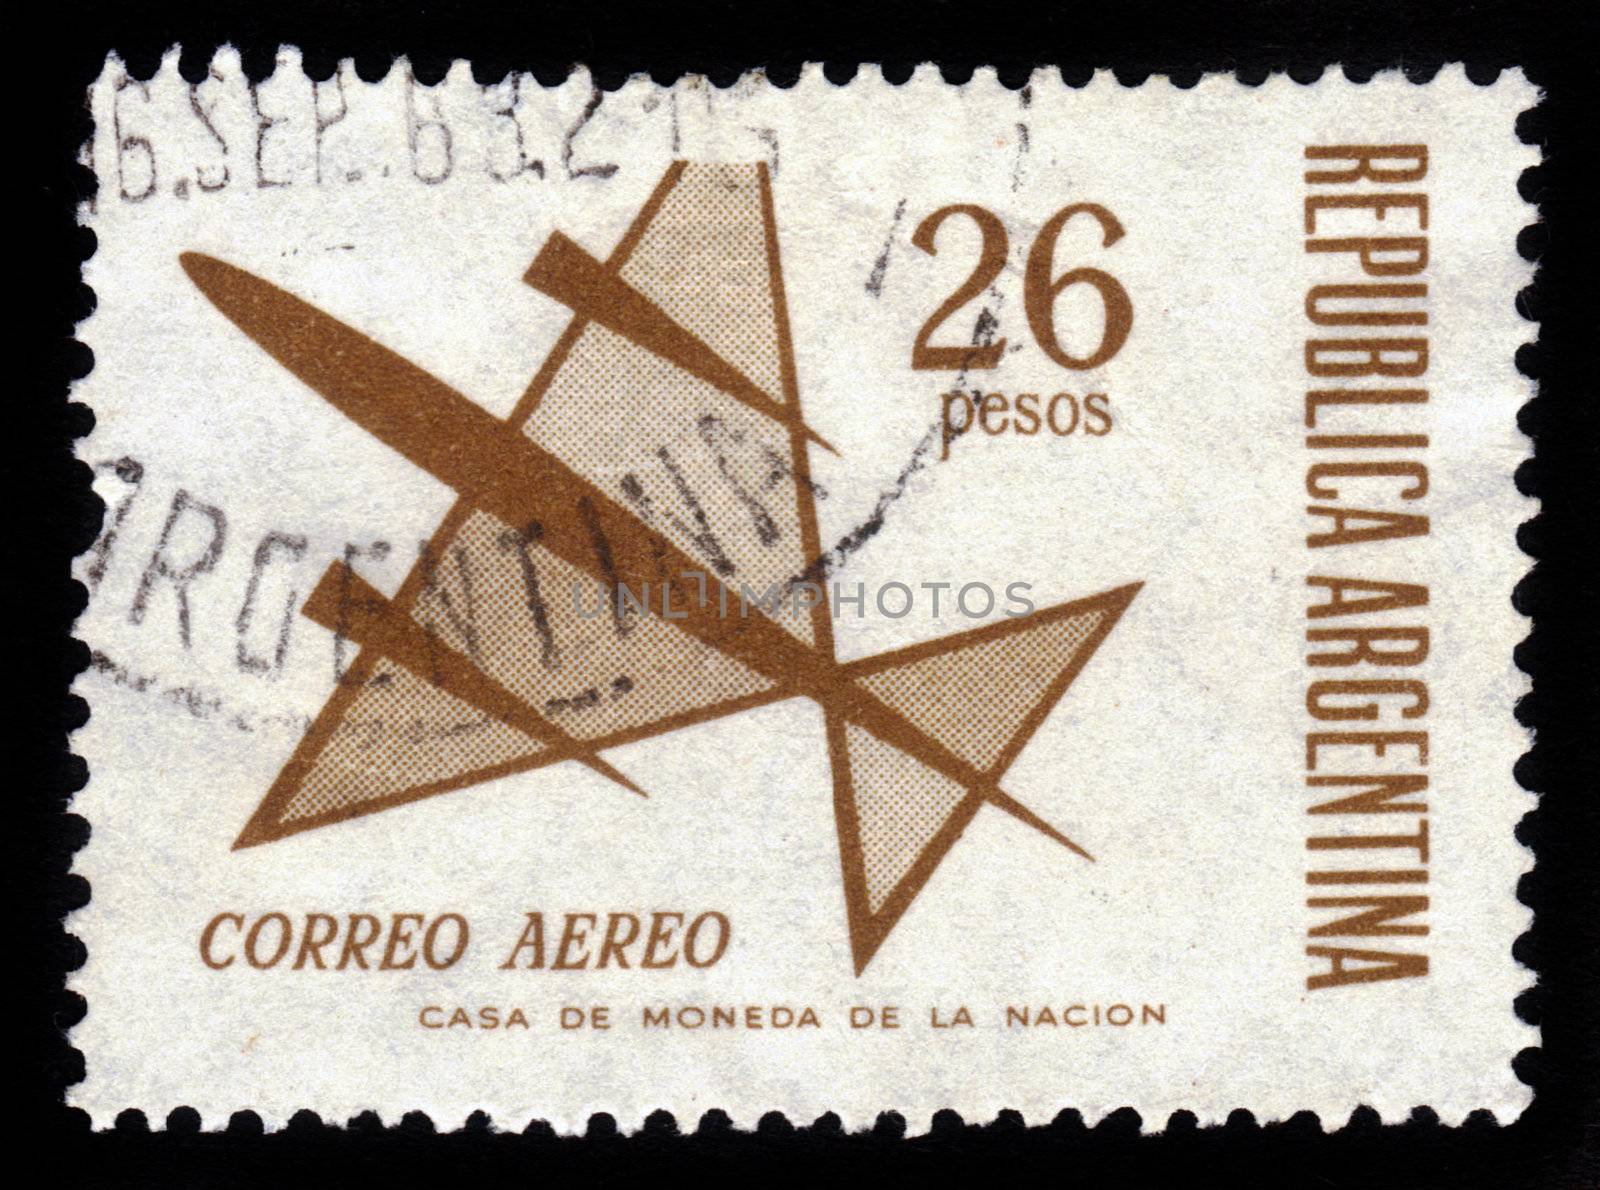 ARGENTINA - CIRCA 1963: A stamp printed in Argentina shows flight of symbolic airplane , brown, circa 1963.